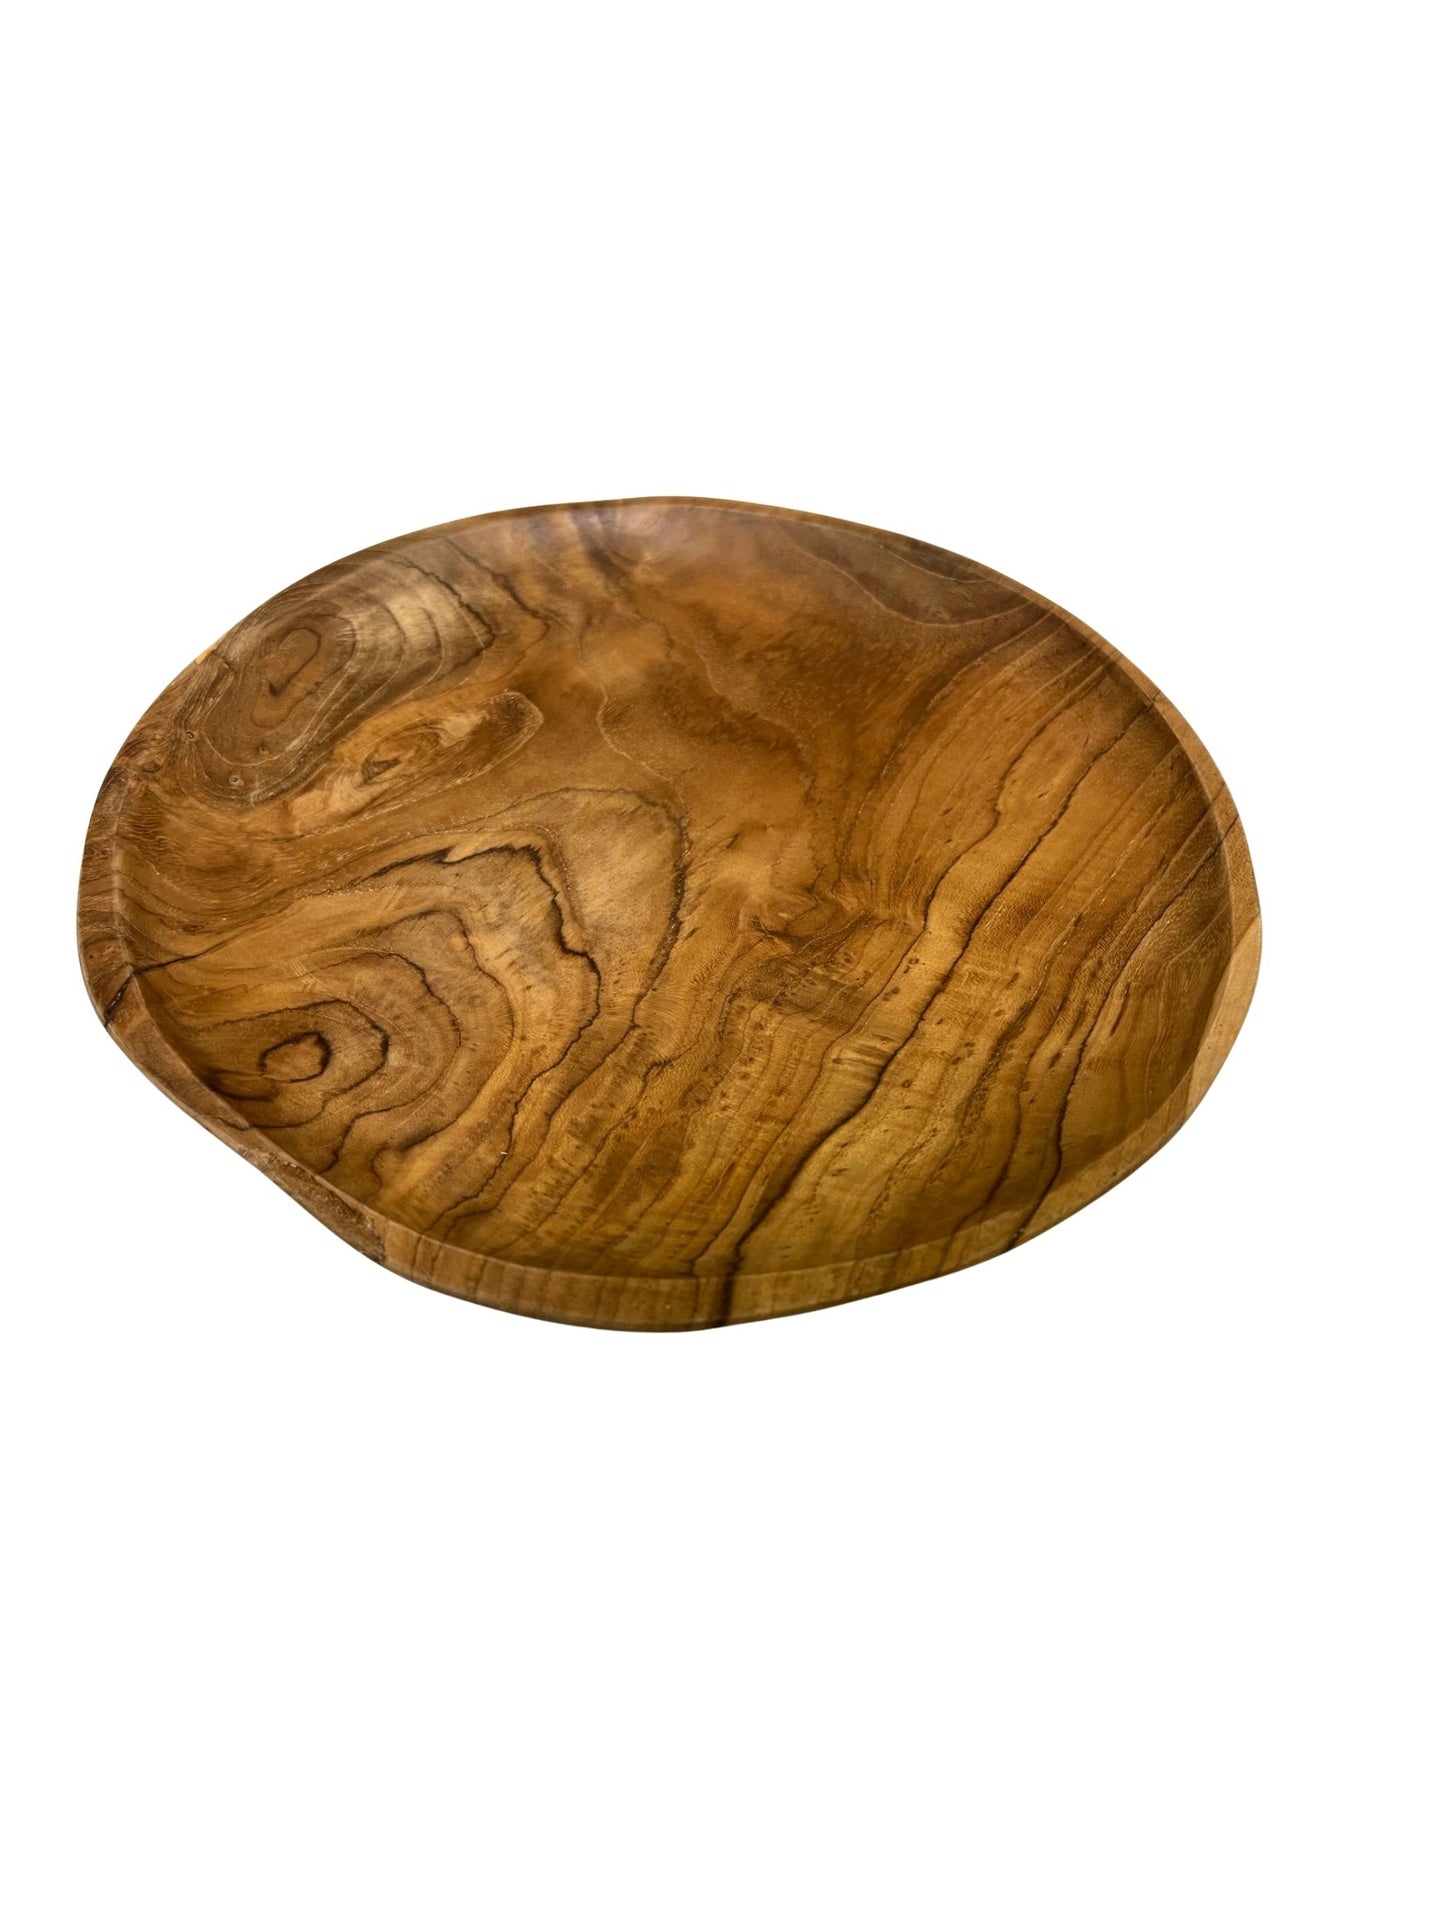 Eclectic Home Accent Teak Plate 2903 Natural  Decor Furniture